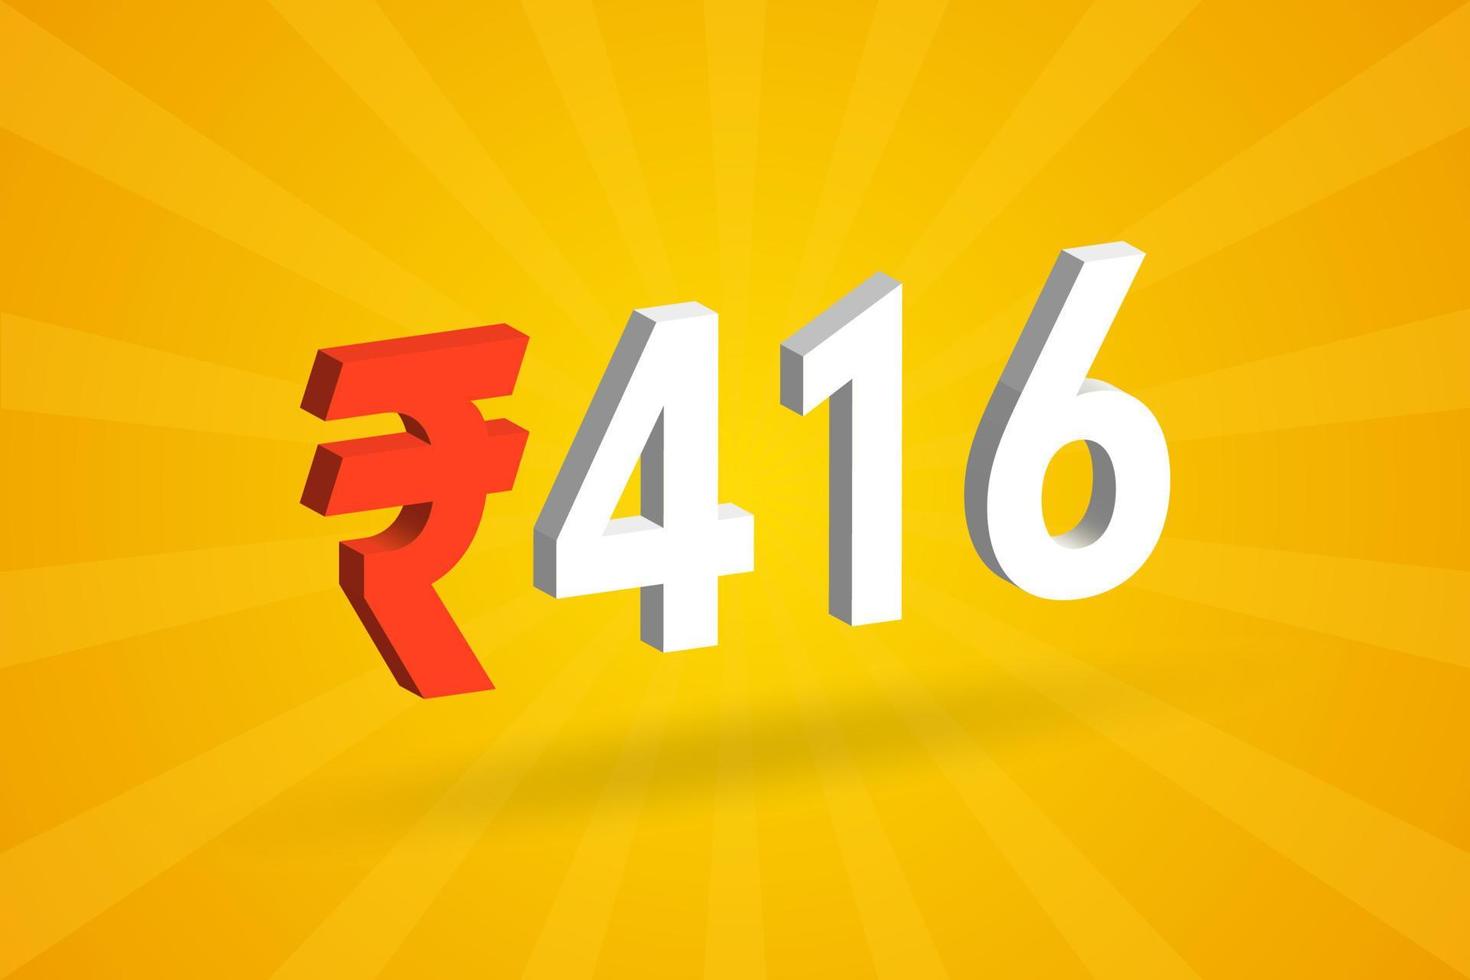 416 Rupee 3D symbol bold text vector image. 3D 416 Indian Rupee currency sign vector illustration